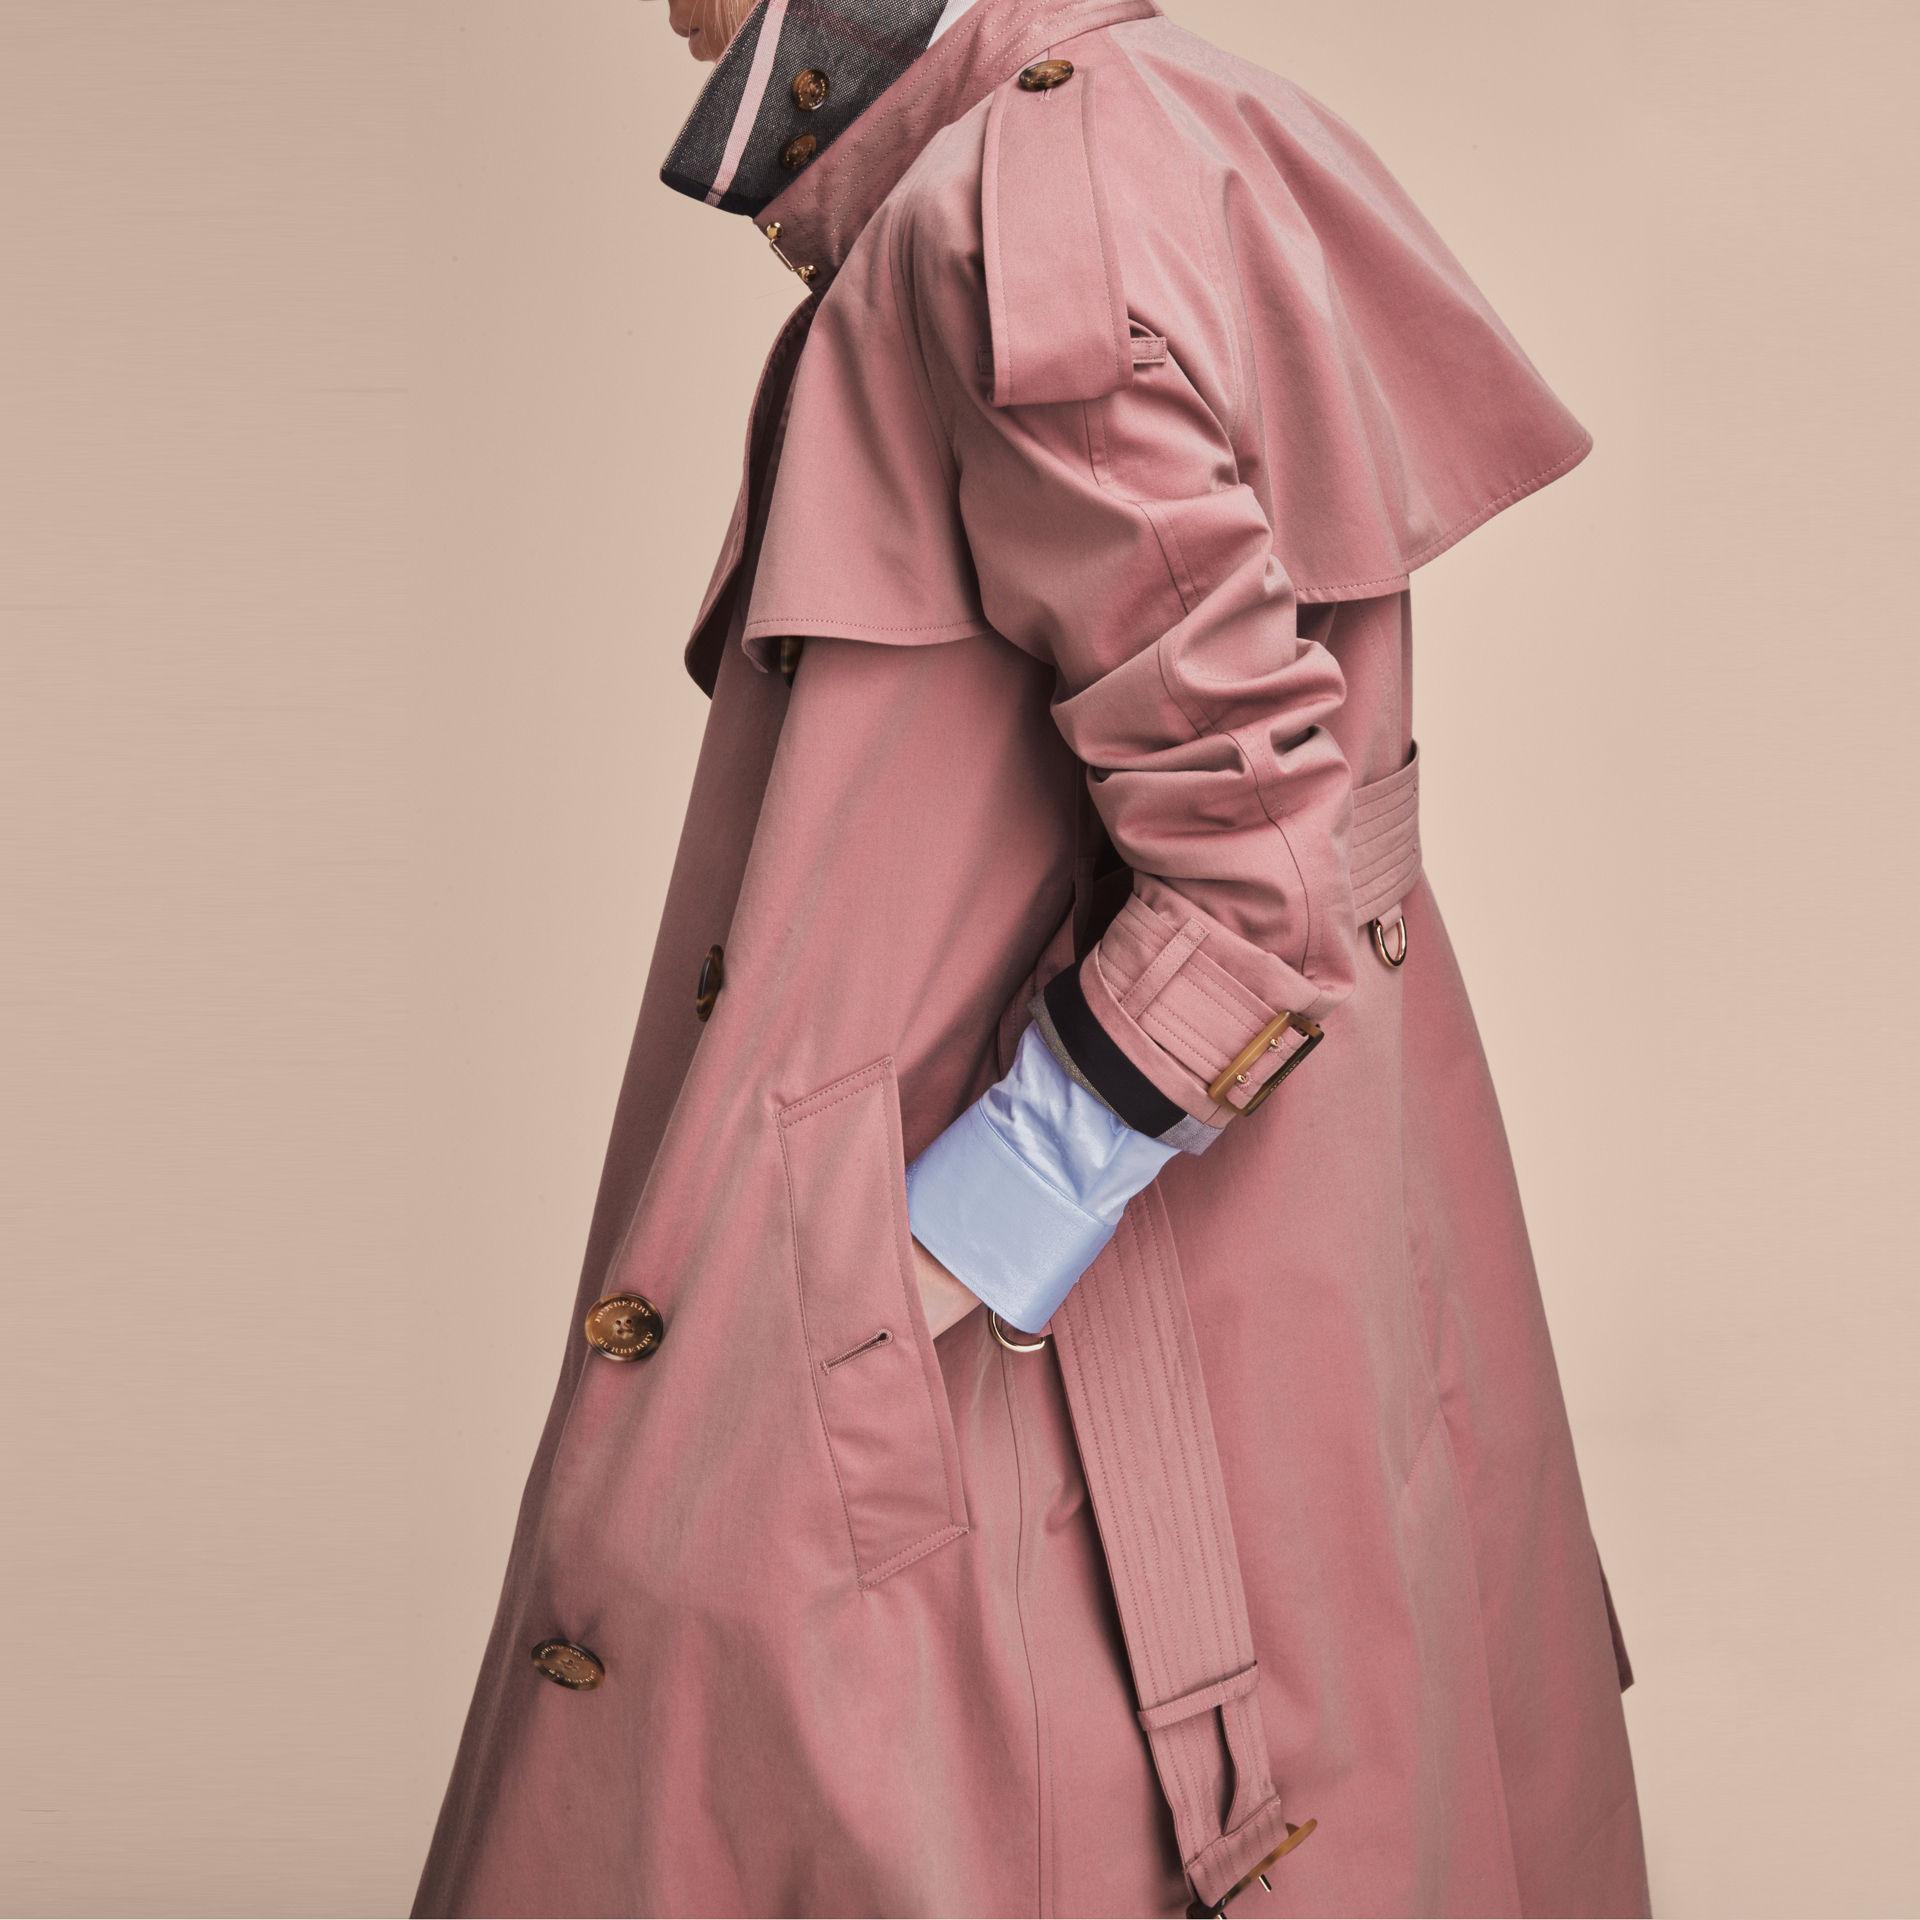 burberry trench coat womens pink